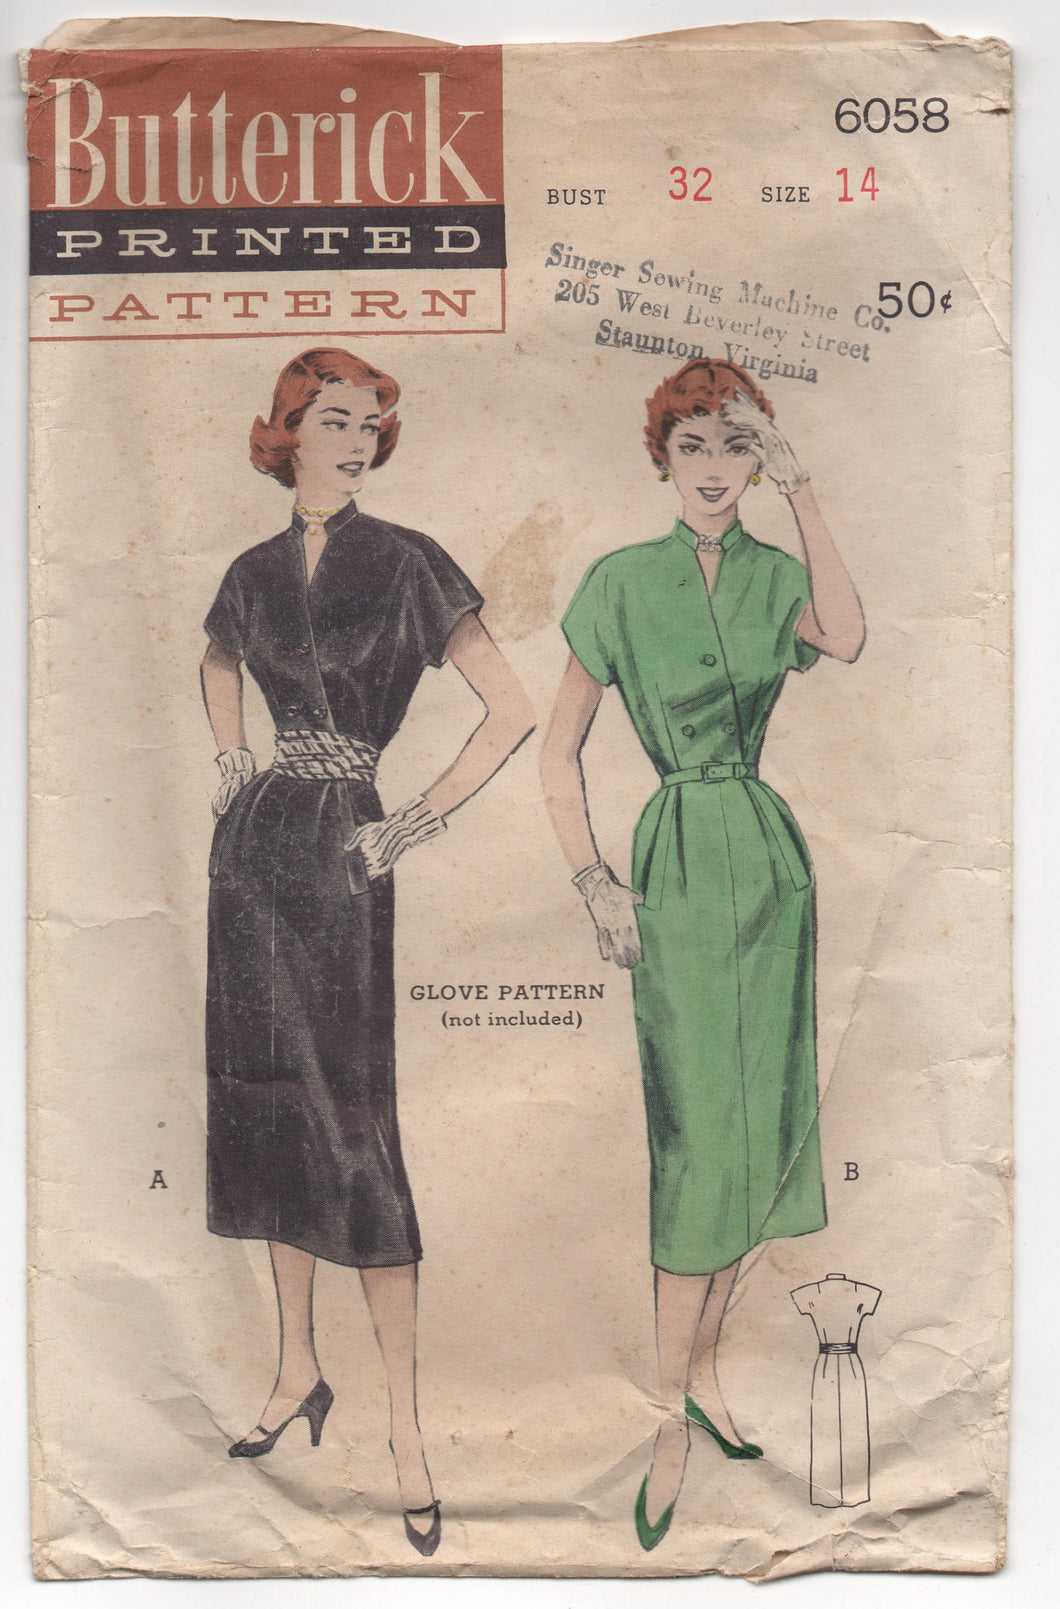 1950's Butterick One Piece Dress with Diagonal Bodice Detail - Bust 32